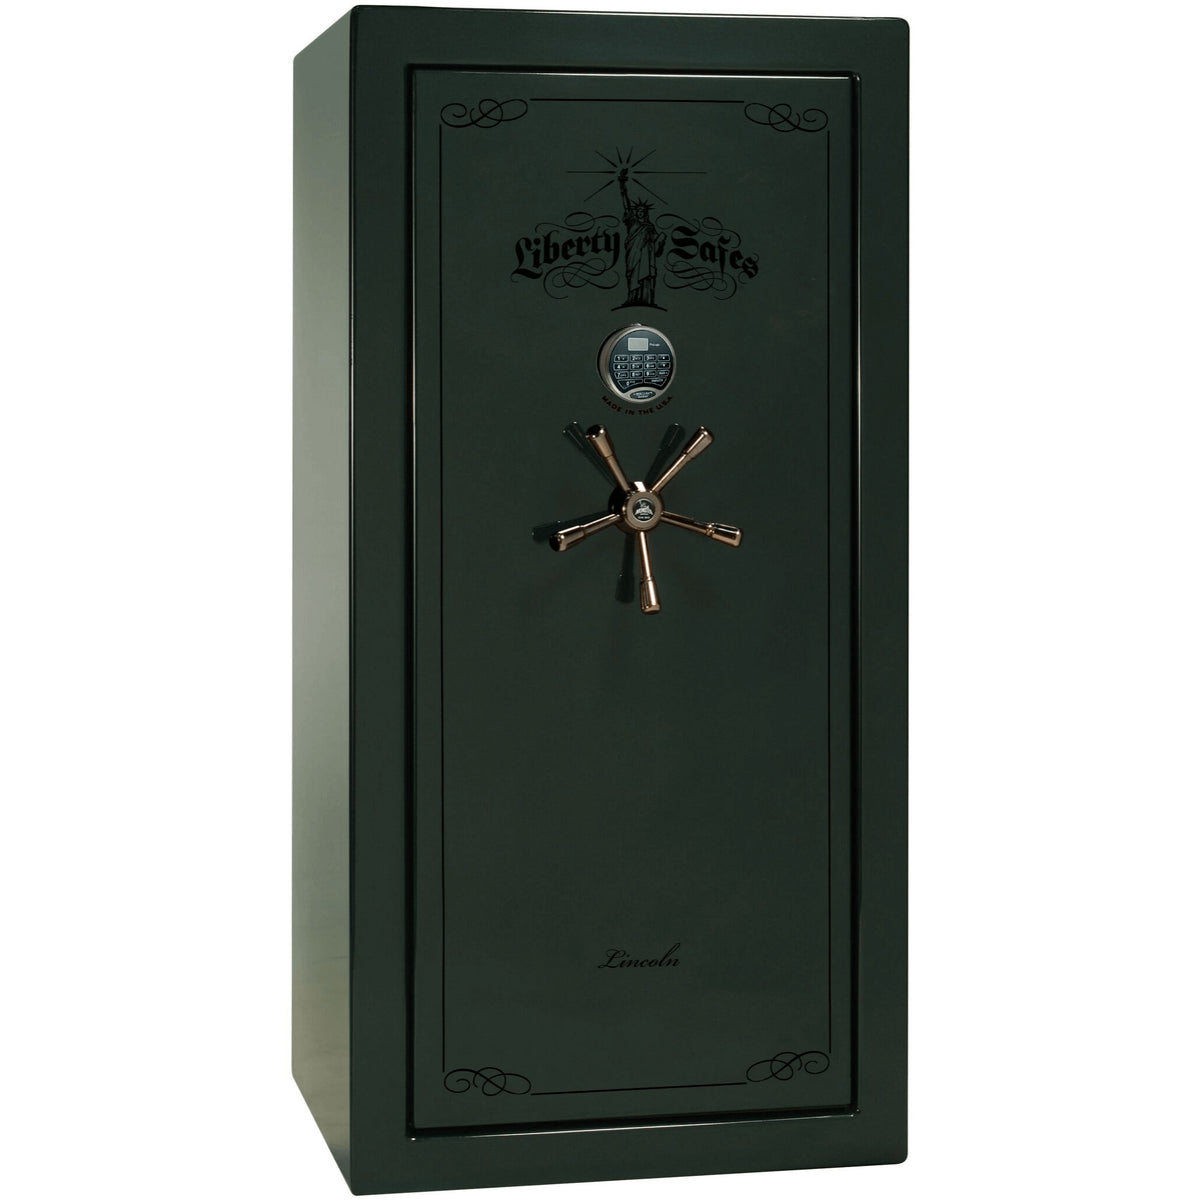 Liberty Lincoln 25 Safe in Green Gloss with Black Chrome Electronic Lock.